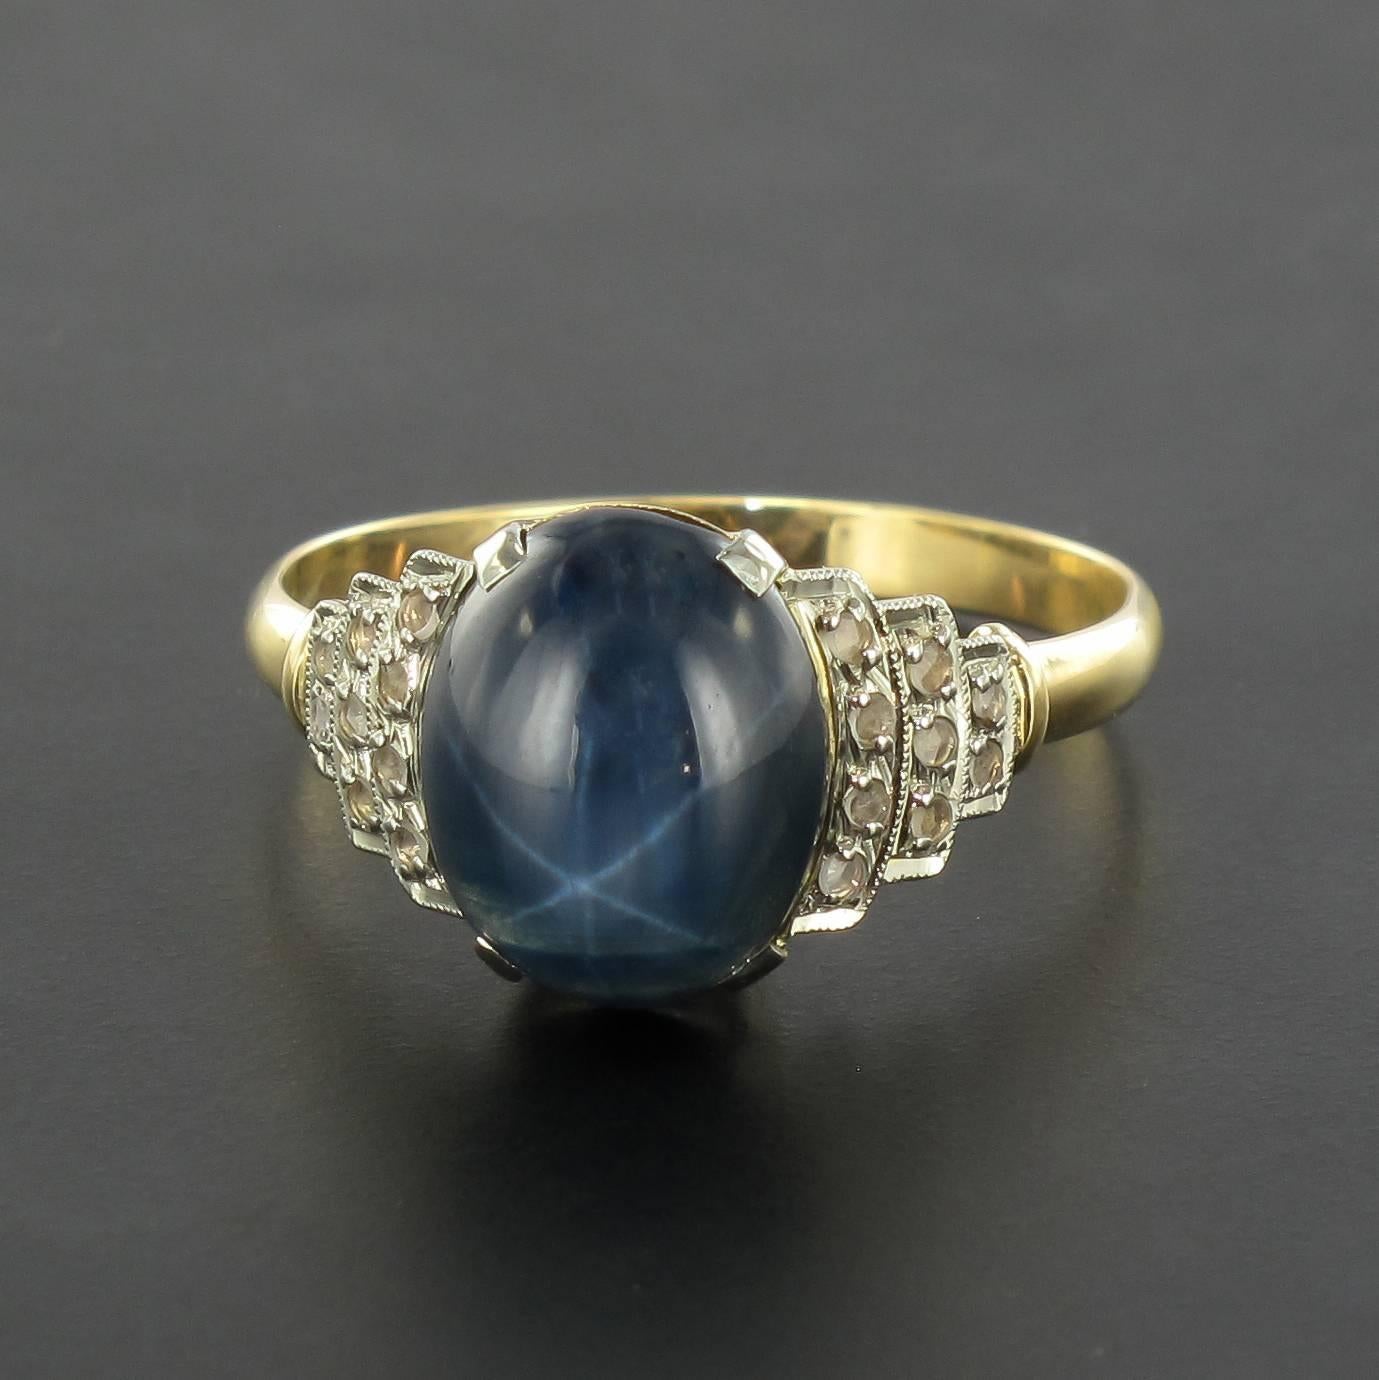 Ring in 18 karat yellow gold, eagle's head hallmark. 
This gorgeous Art Deco style ring is claw set with an oval star sapphire cabochon that is accentuated by rose- cut diamonds on each side in a geometric setting. 
Weight of the sapphire : 3.31